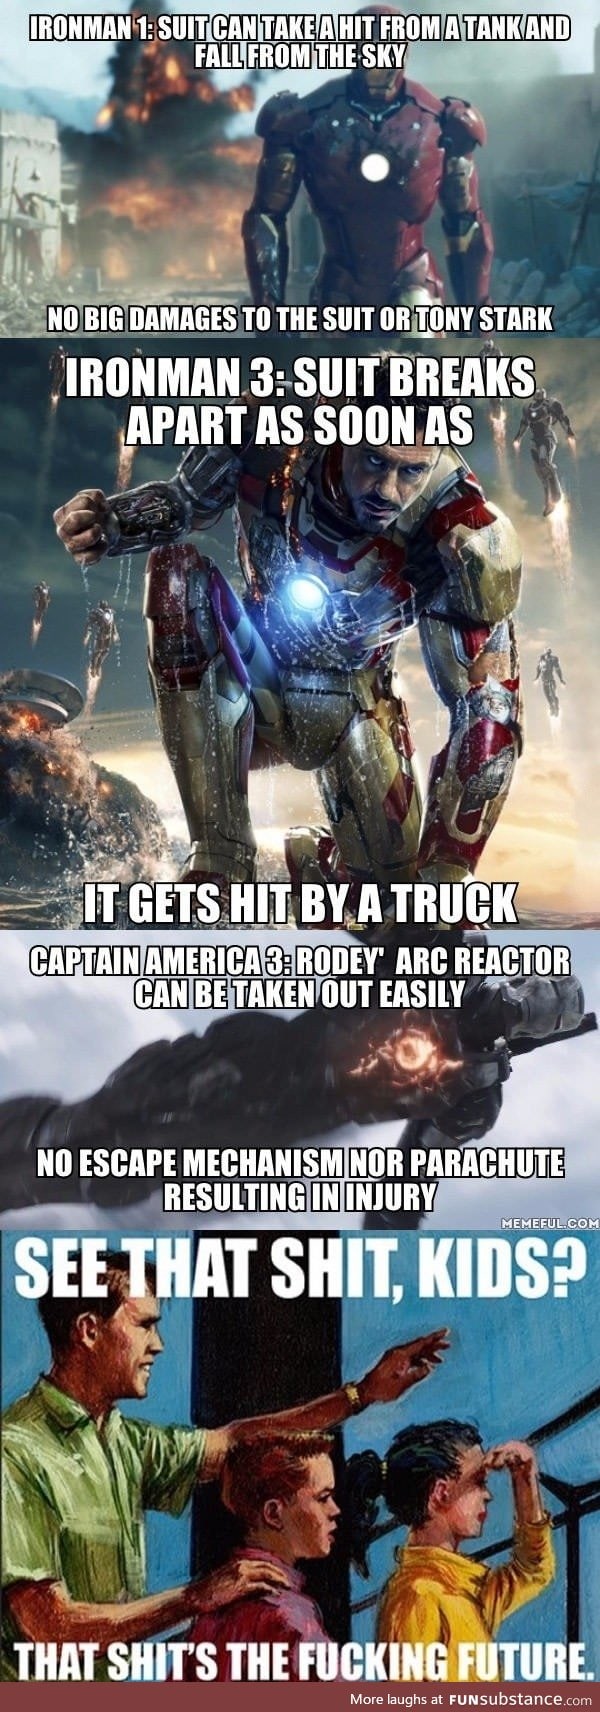 Ironman is going backwards!